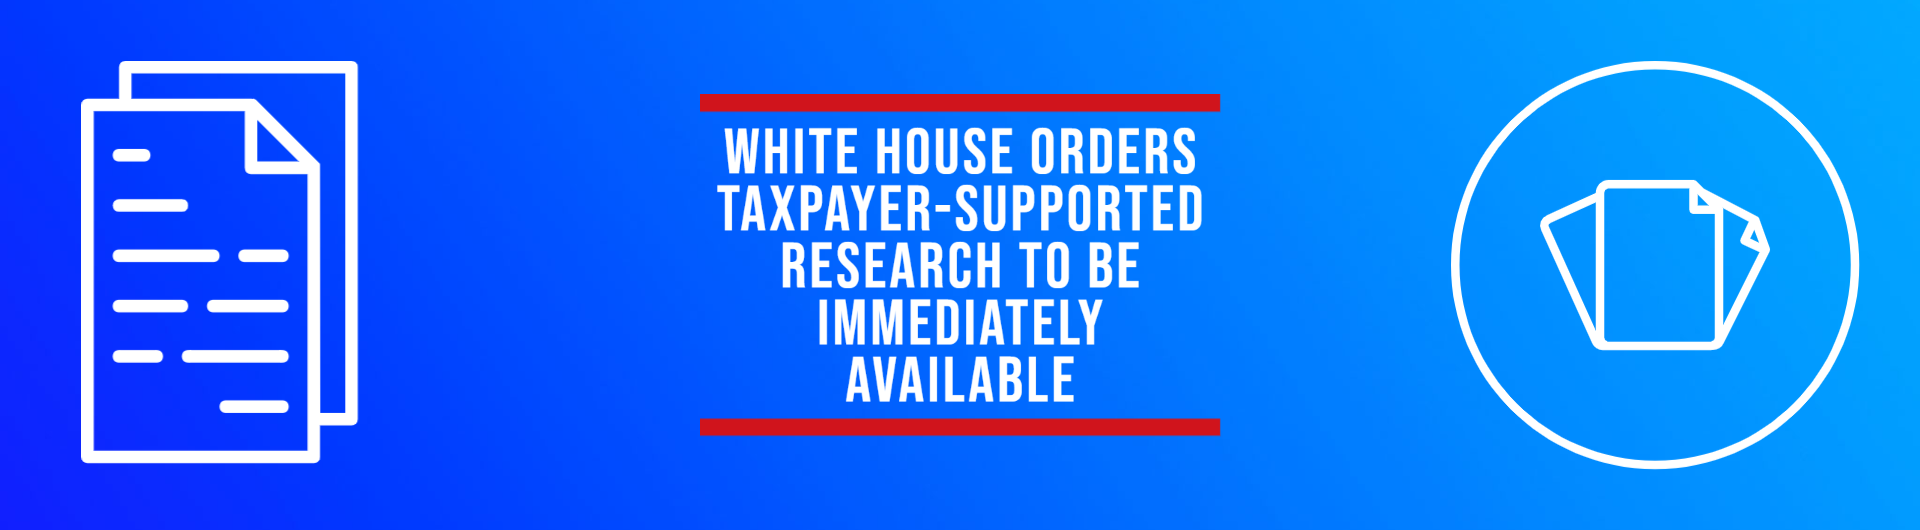 White House orders taxpayer-supported research to be immediately available